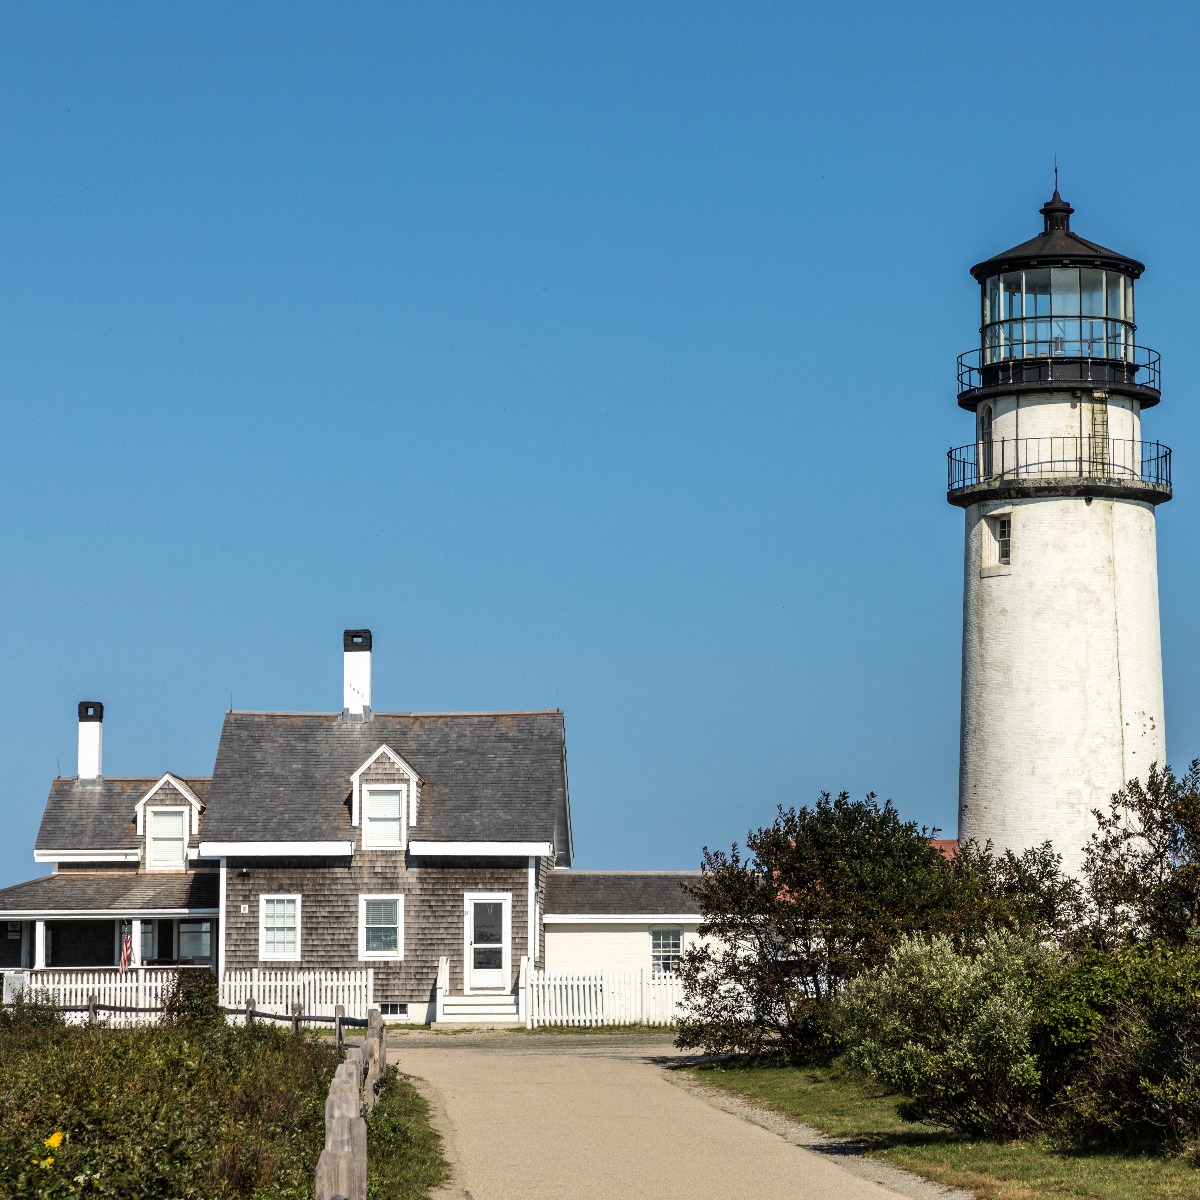 The Highland Light, also known as the Cape Cod Light and the North Truro Lights, is one of the tallest and oldest lighthouses on Cape Cod
